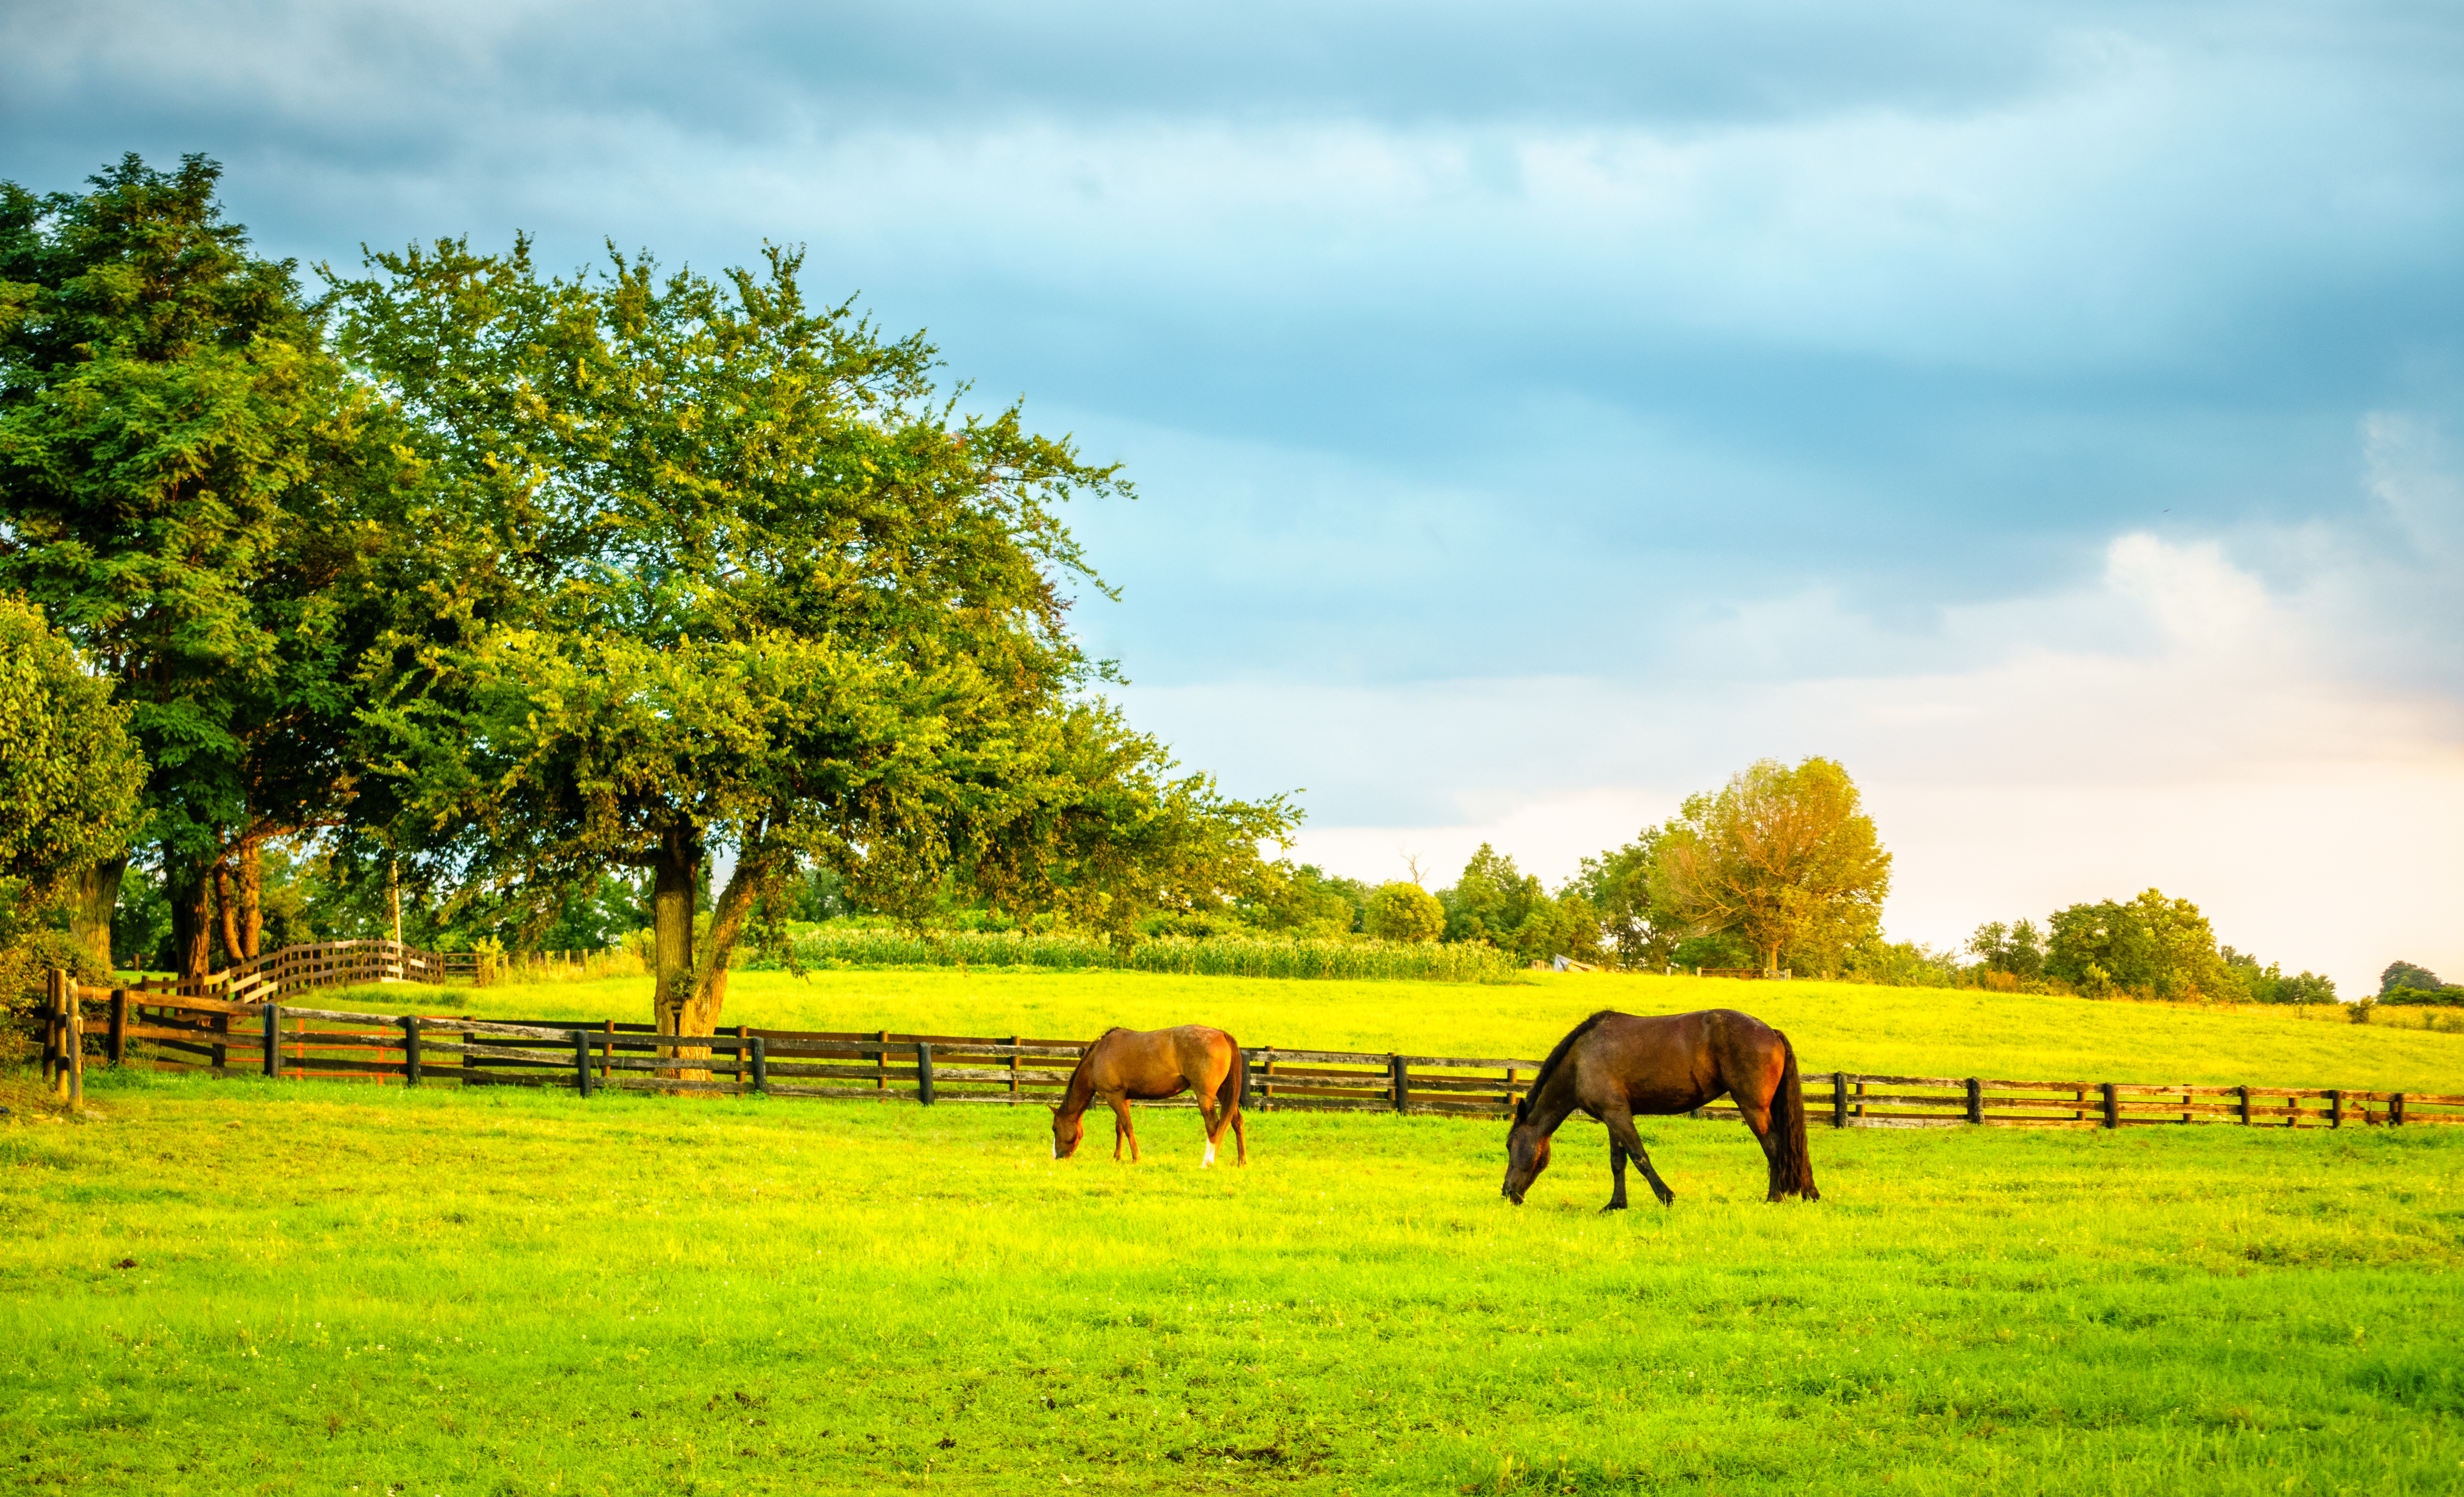 Horses grazing in a summer pastures with trees in the distance
